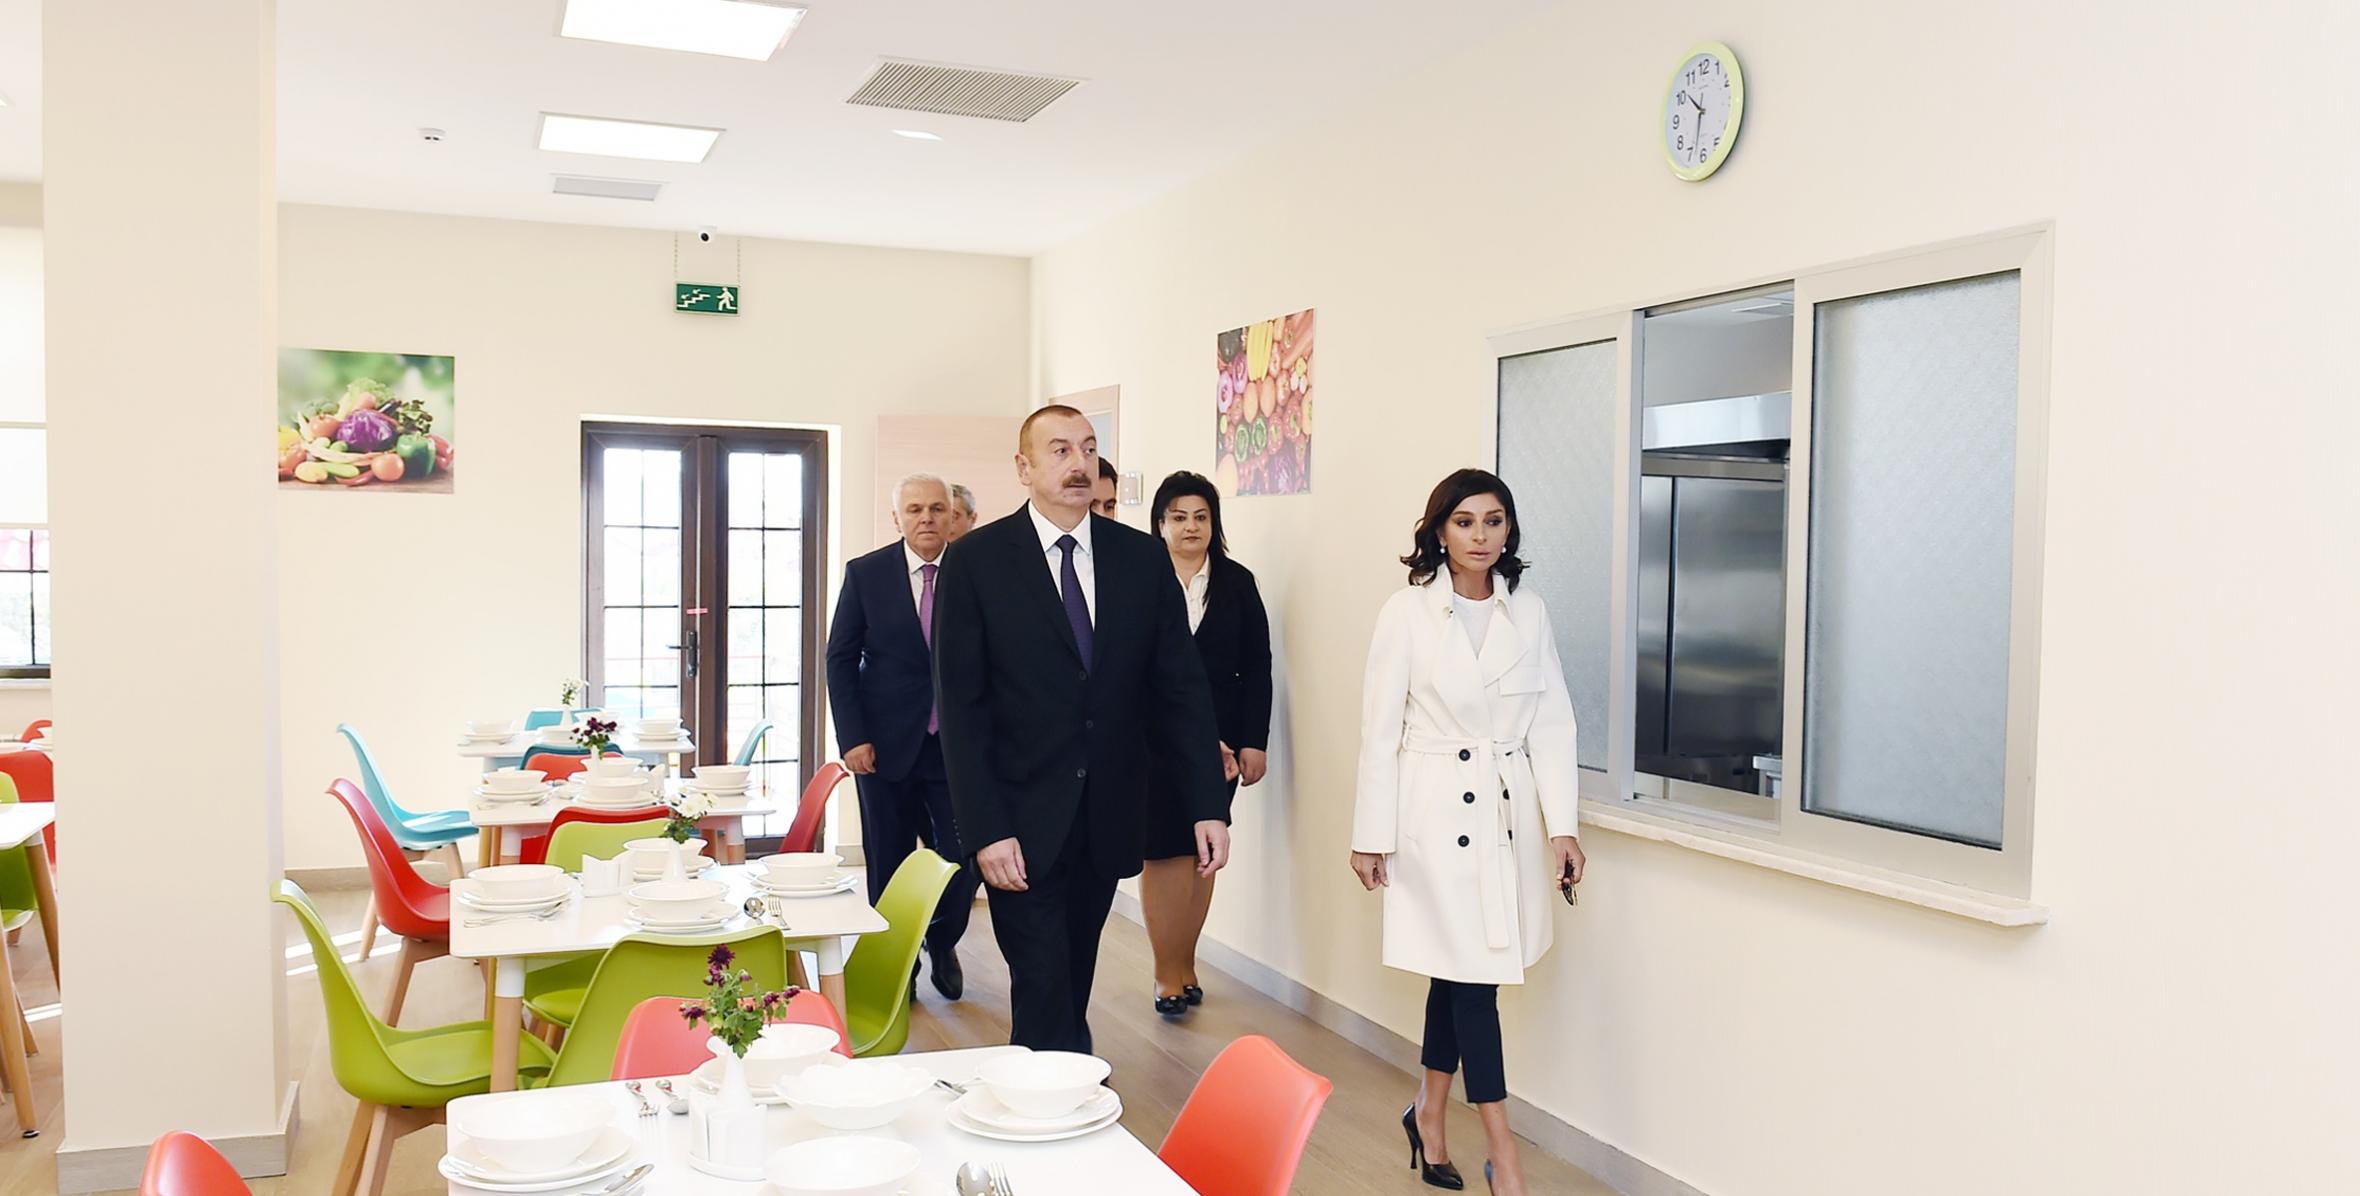 Ilham Aliyev opened new building of mixed type orphanage in the city of Shaki